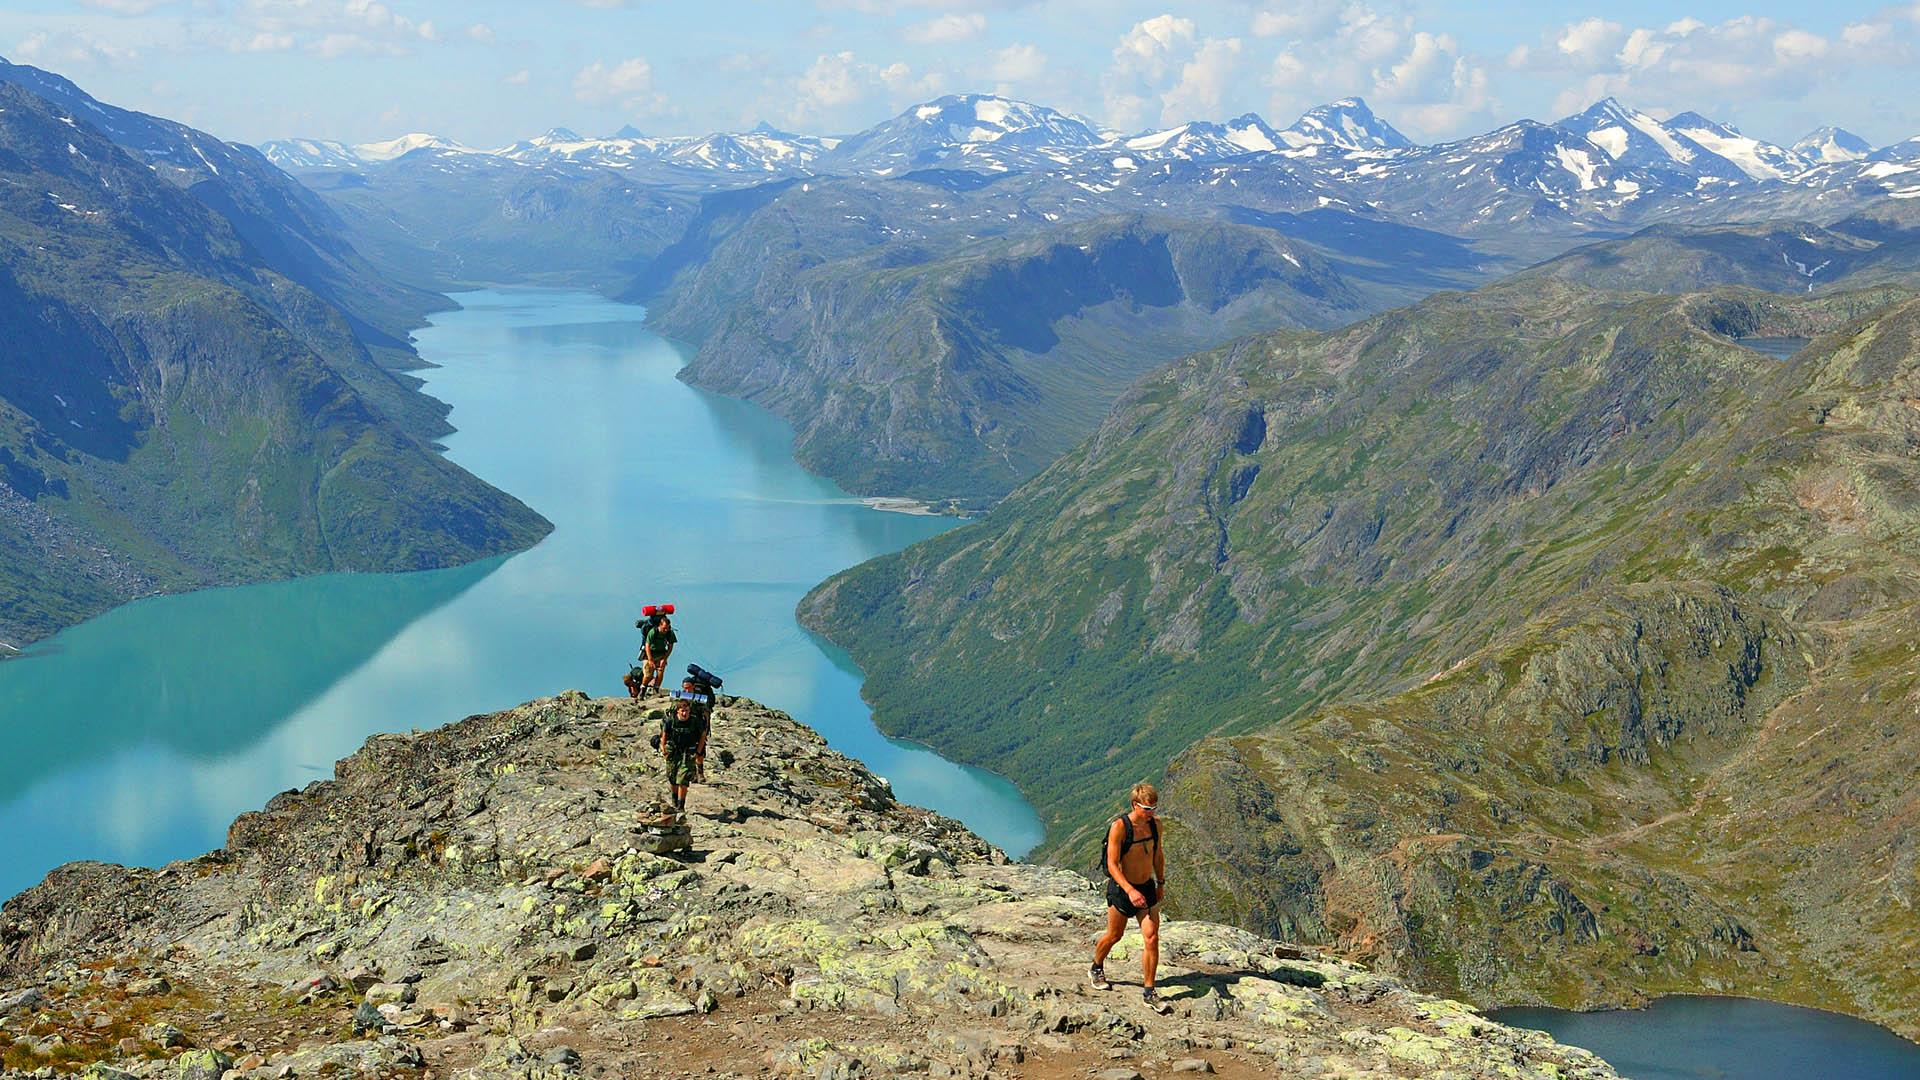 Hikers emerge over a ridge edge with a long and narrow mountain lake surrounded by high peaks in the background on a fine and warm summer day.